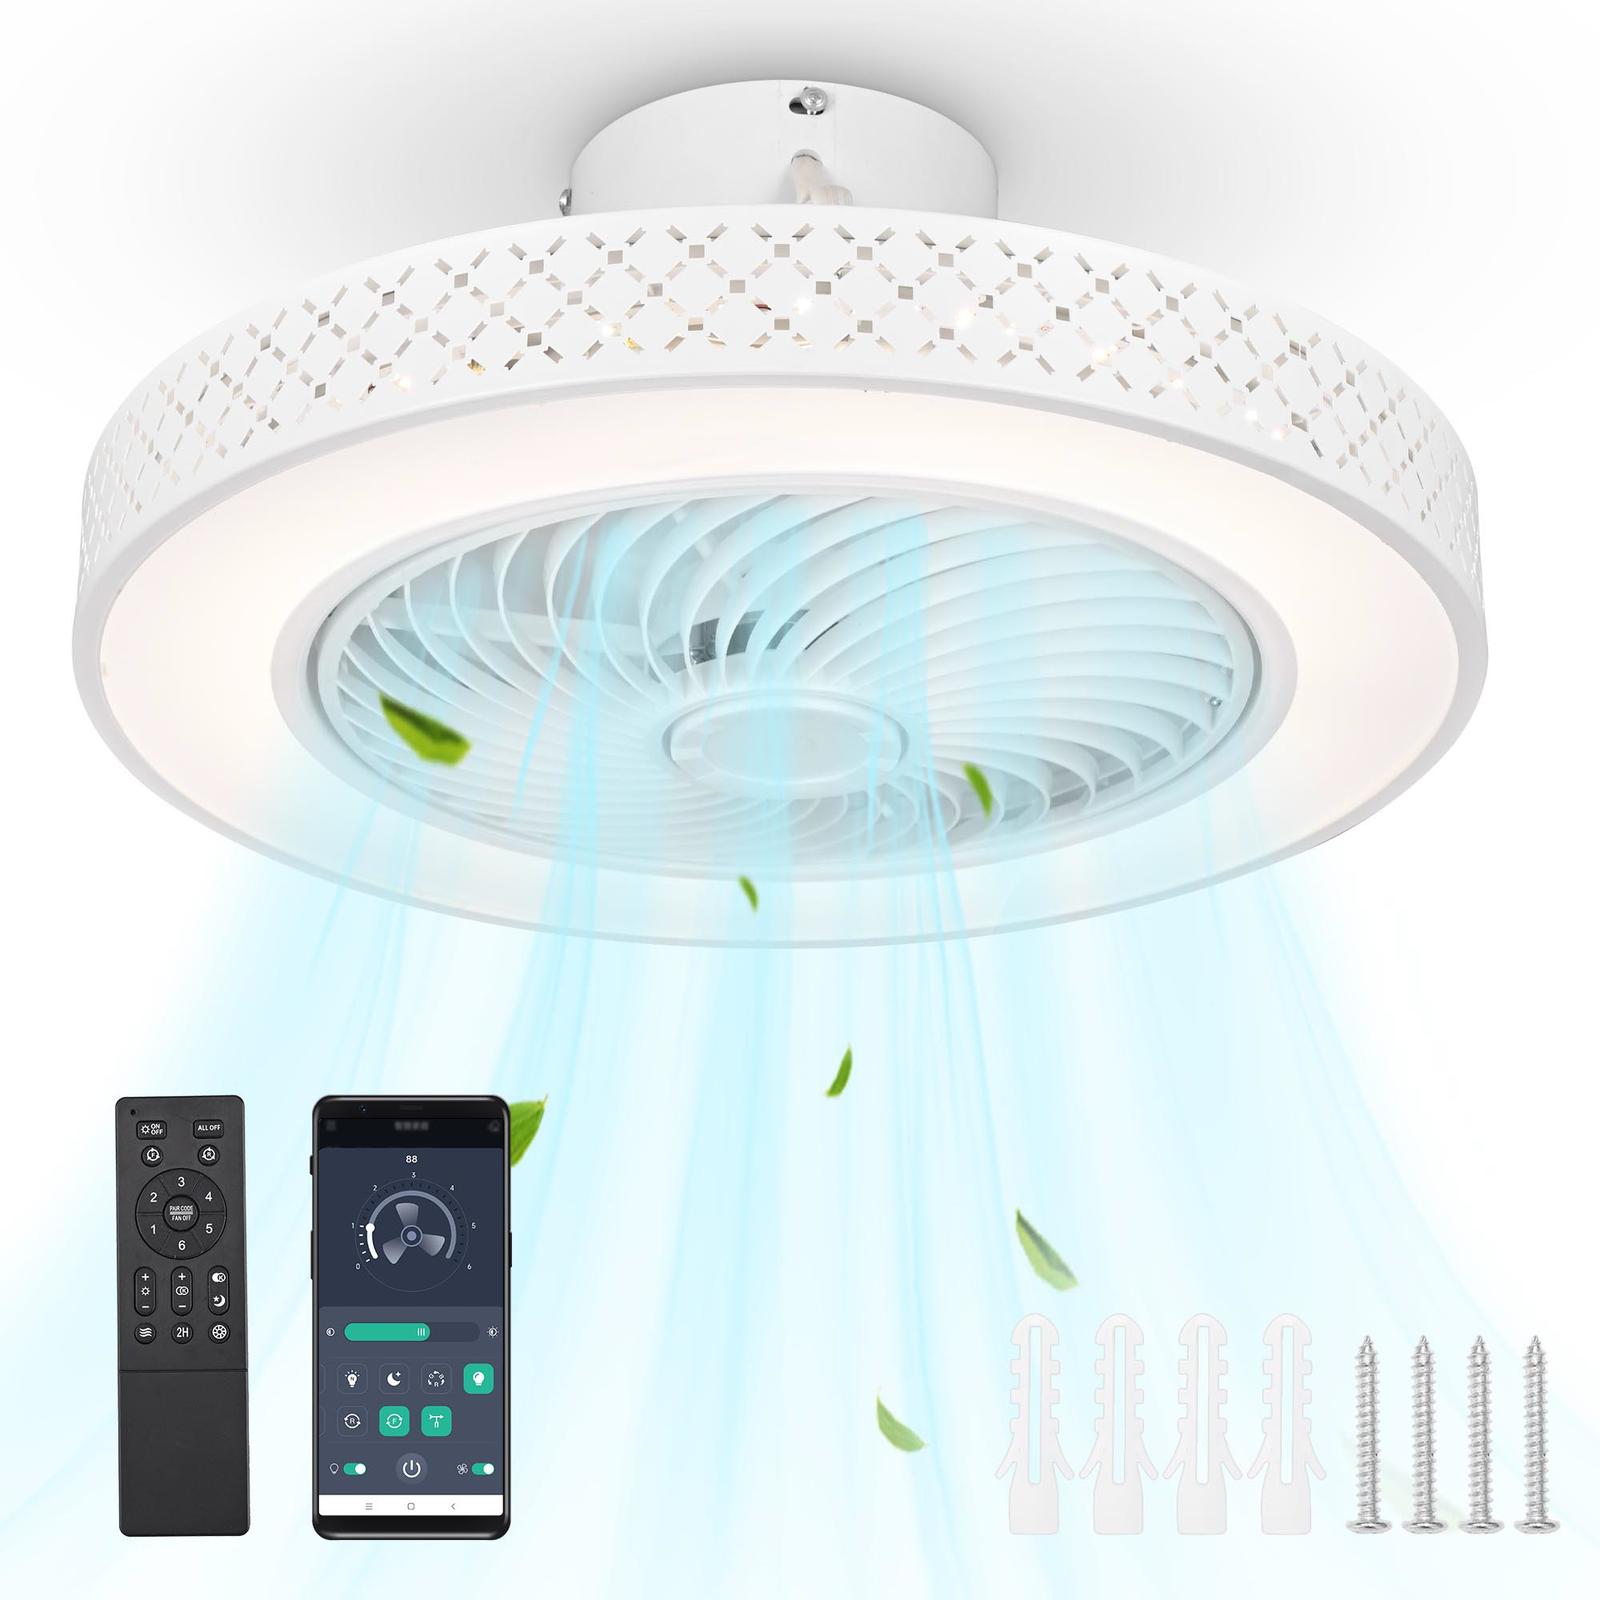 Ceiling fan with remote and smartphone control